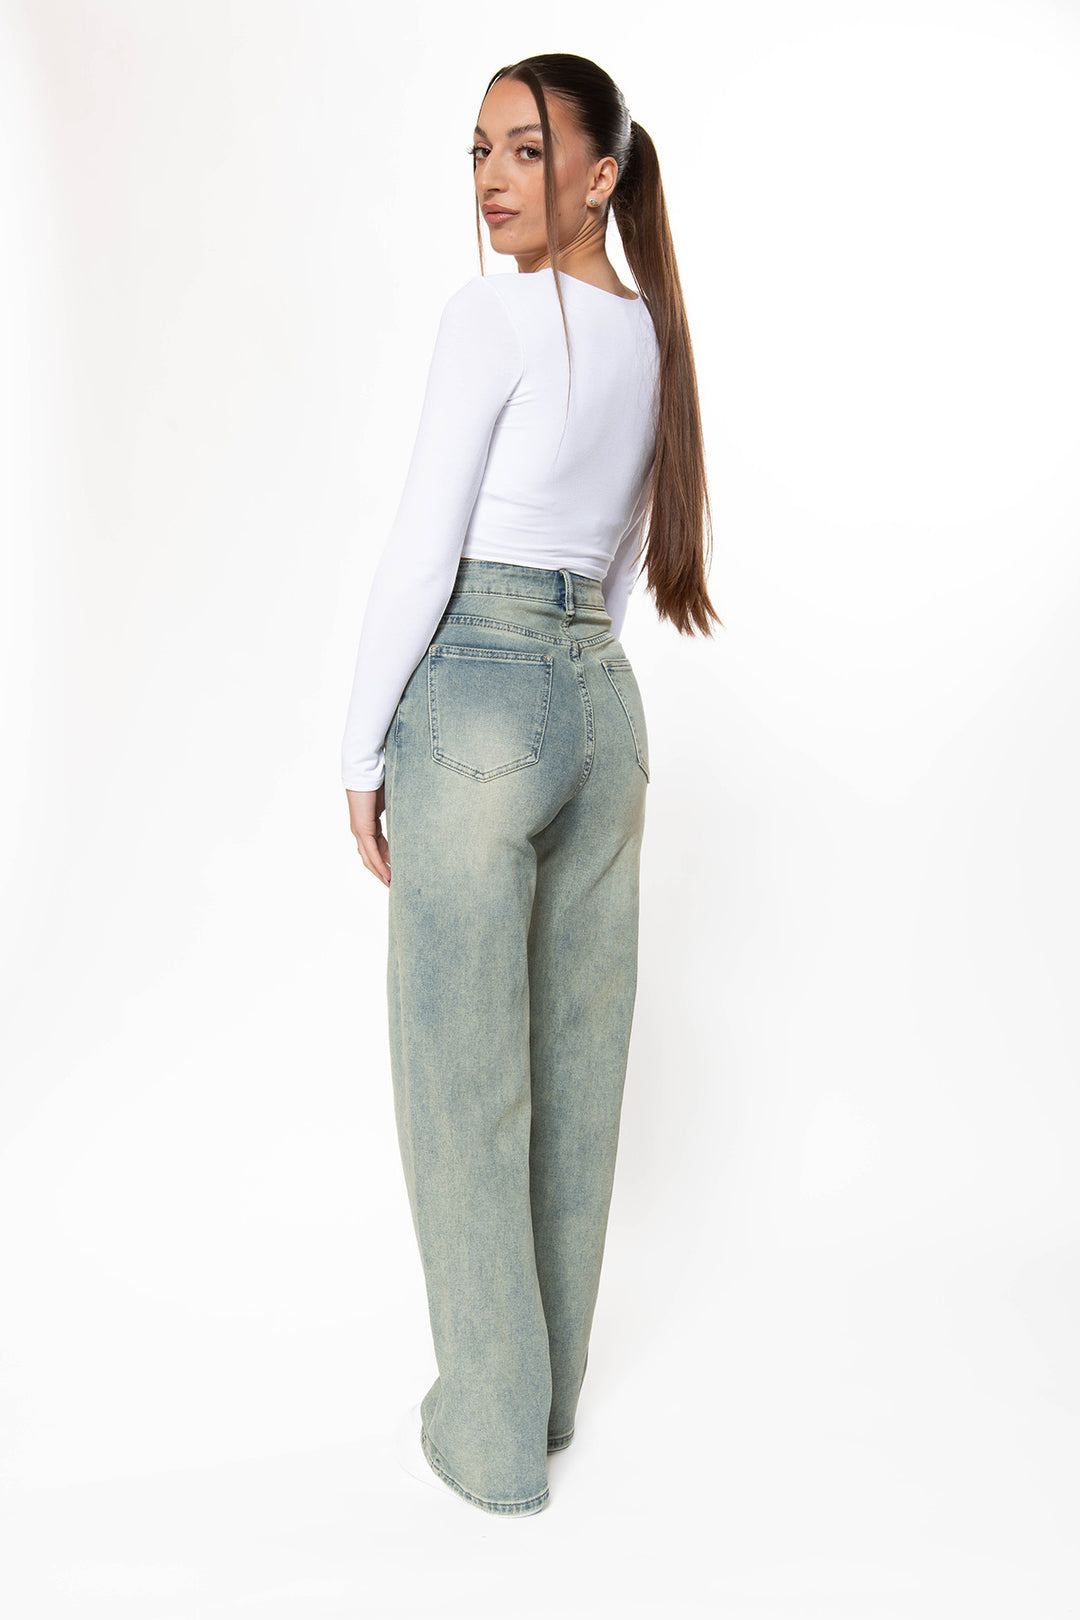 Noellyn Vintage Stretch Wide Leg Jeans Jeans Routines Fashion   